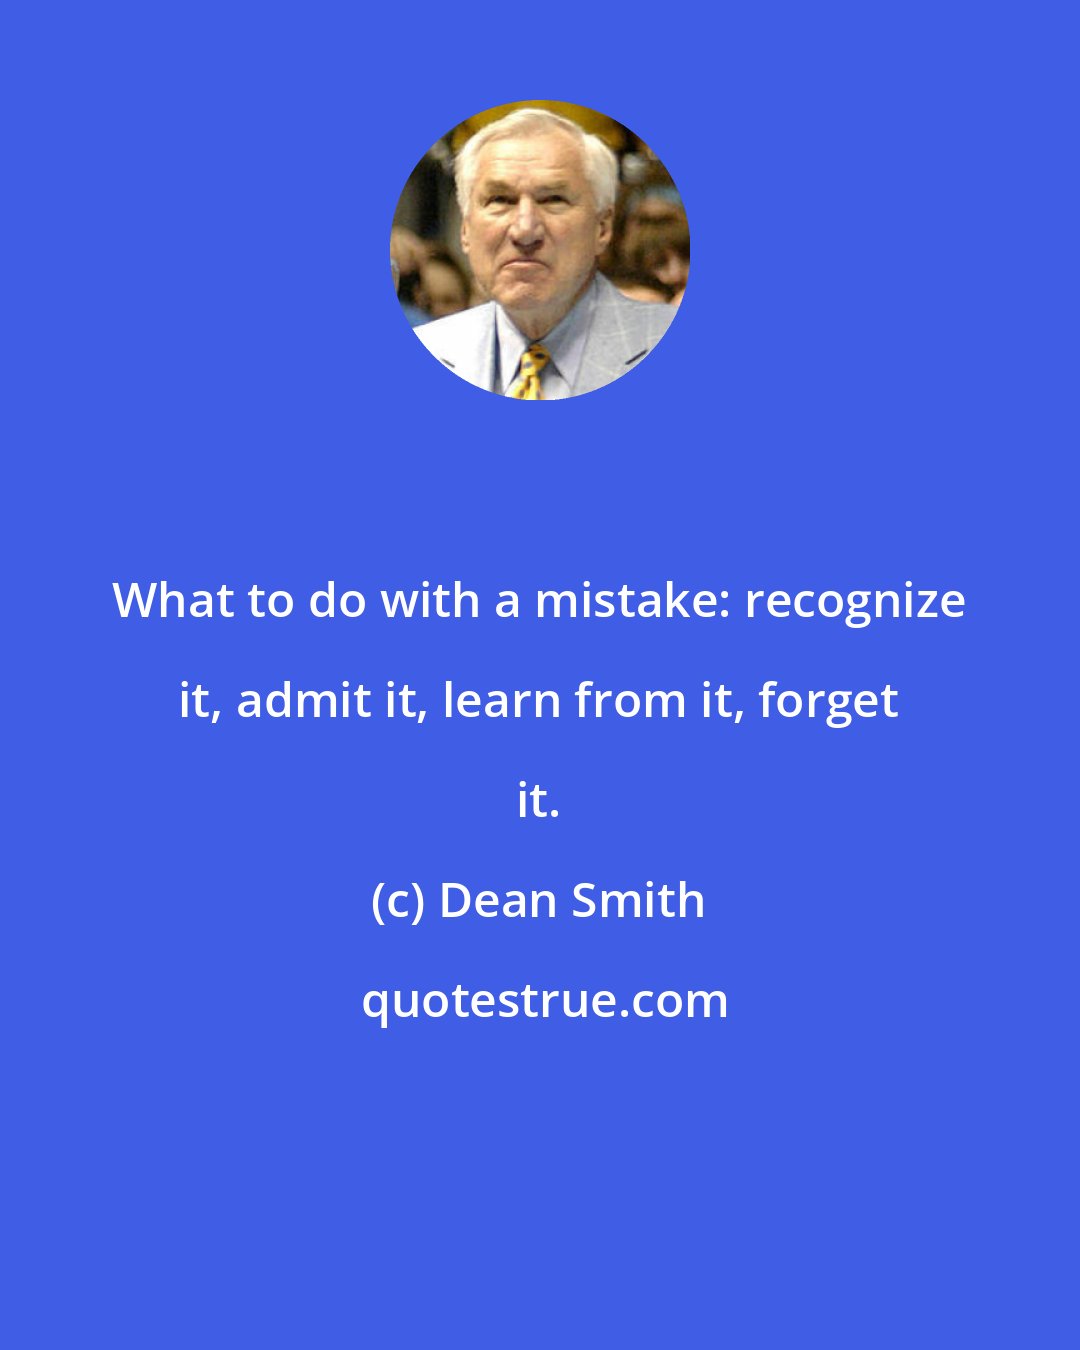 Dean Smith: What to do with a mistake: recognize it, admit it, learn from it, forget it.